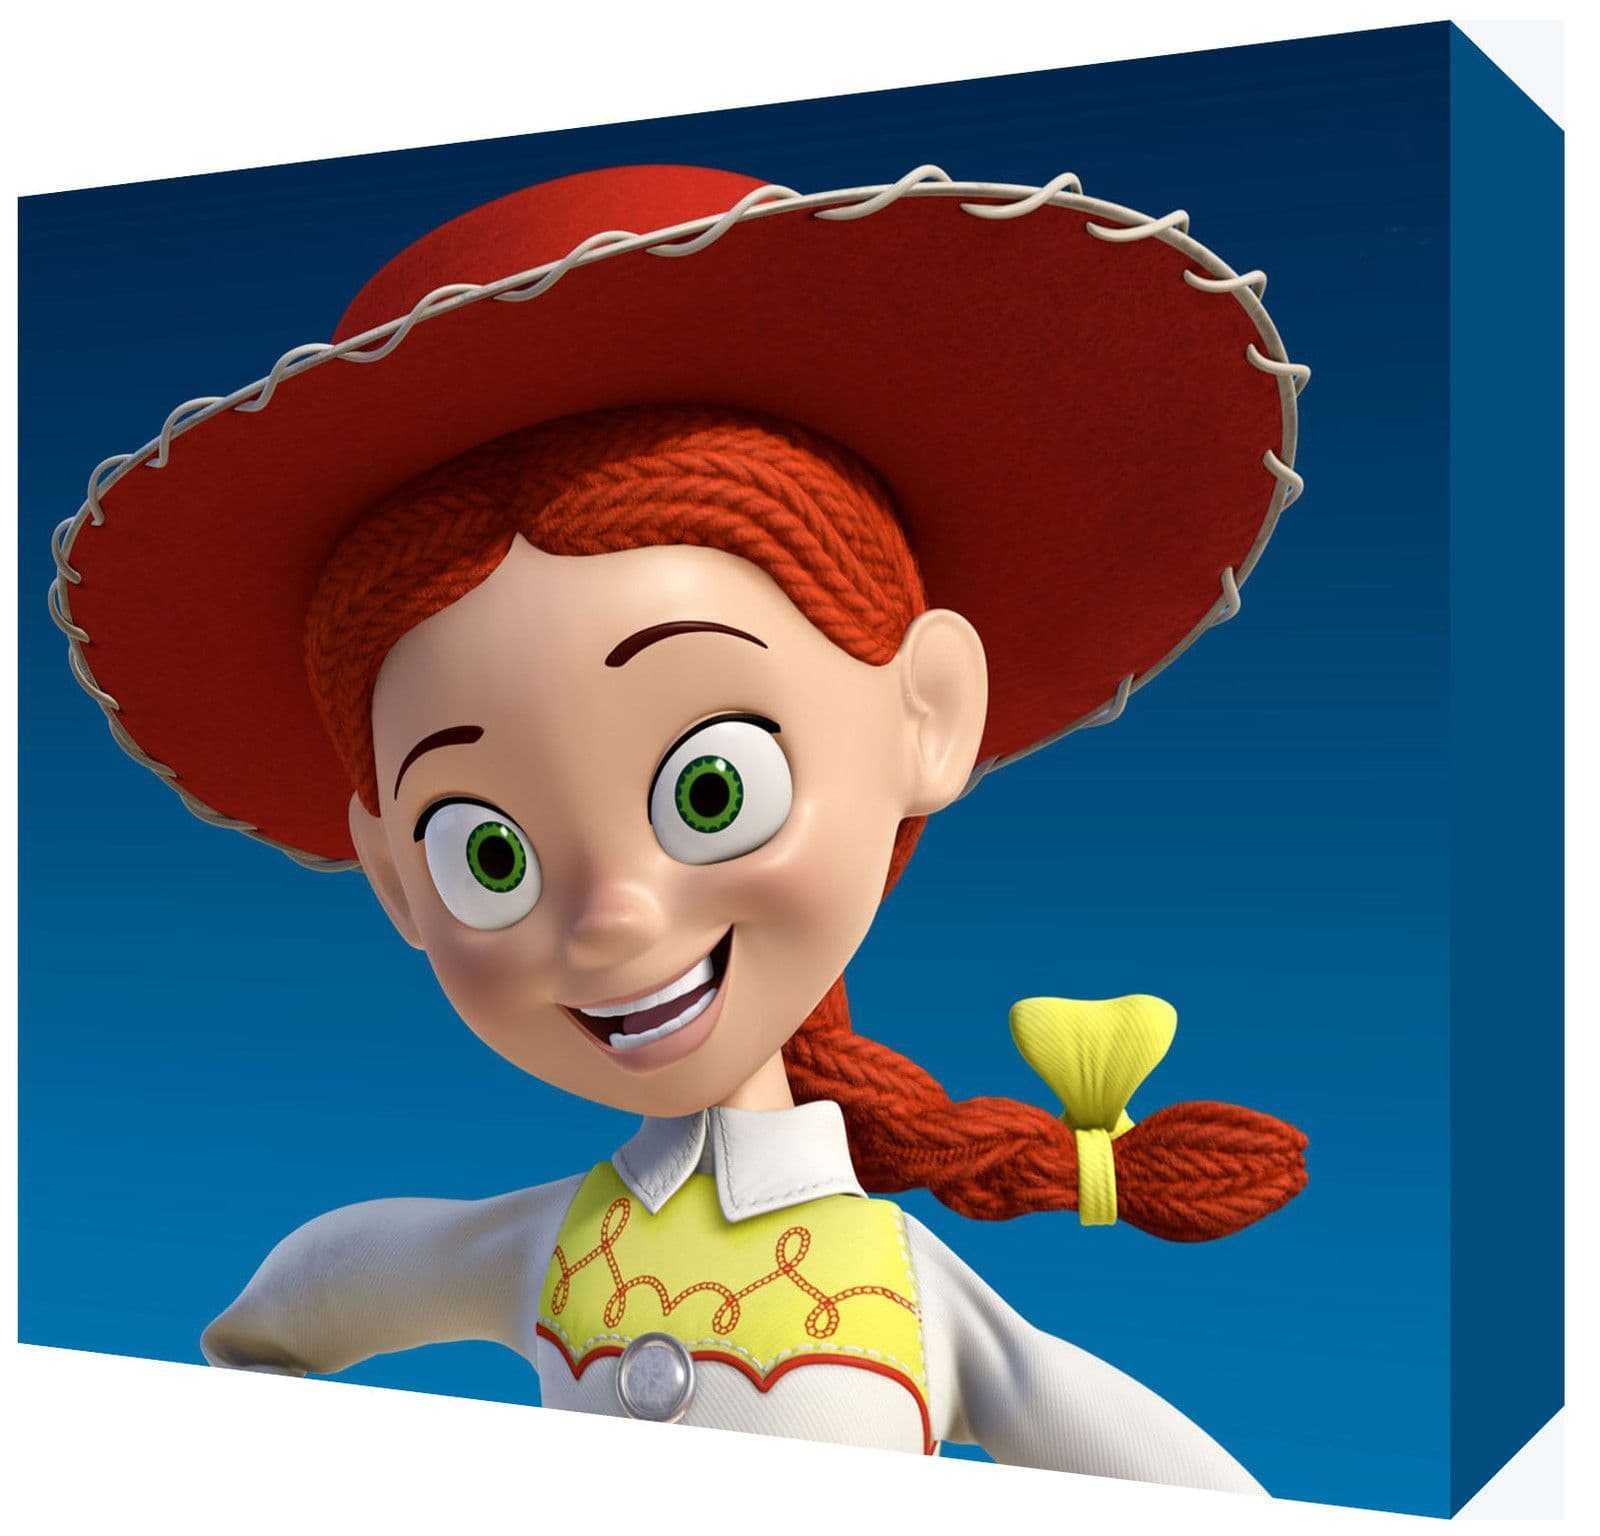 brandon pickering recommends pics of jessie from toy story pic